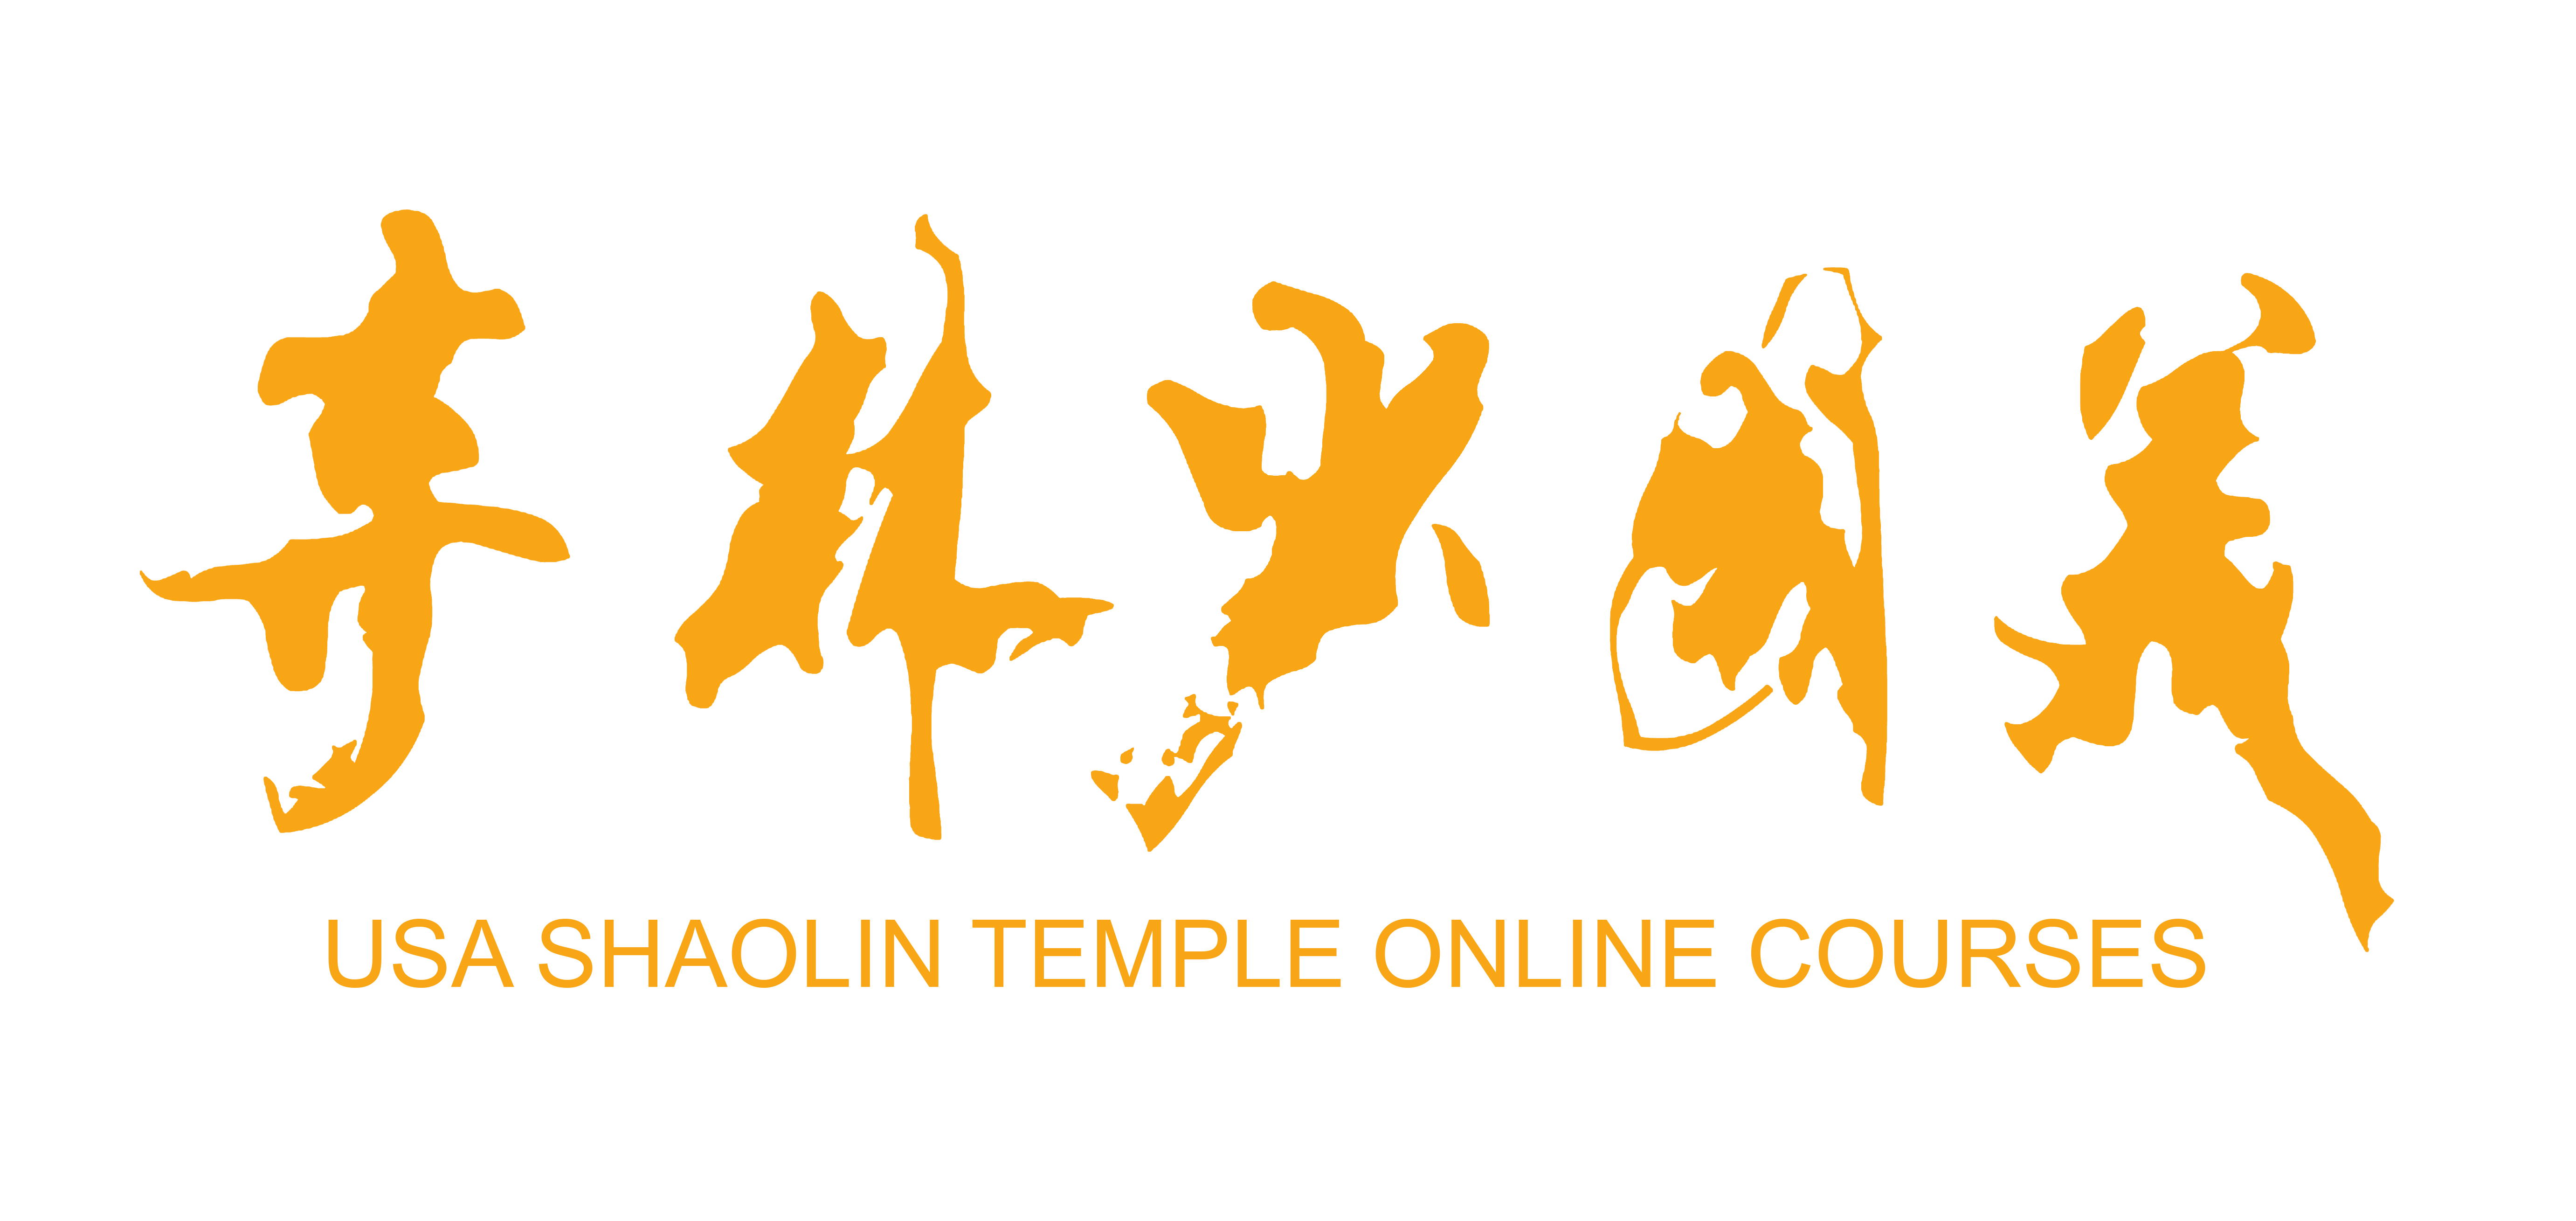 USA Shaolin Temple Online Courses